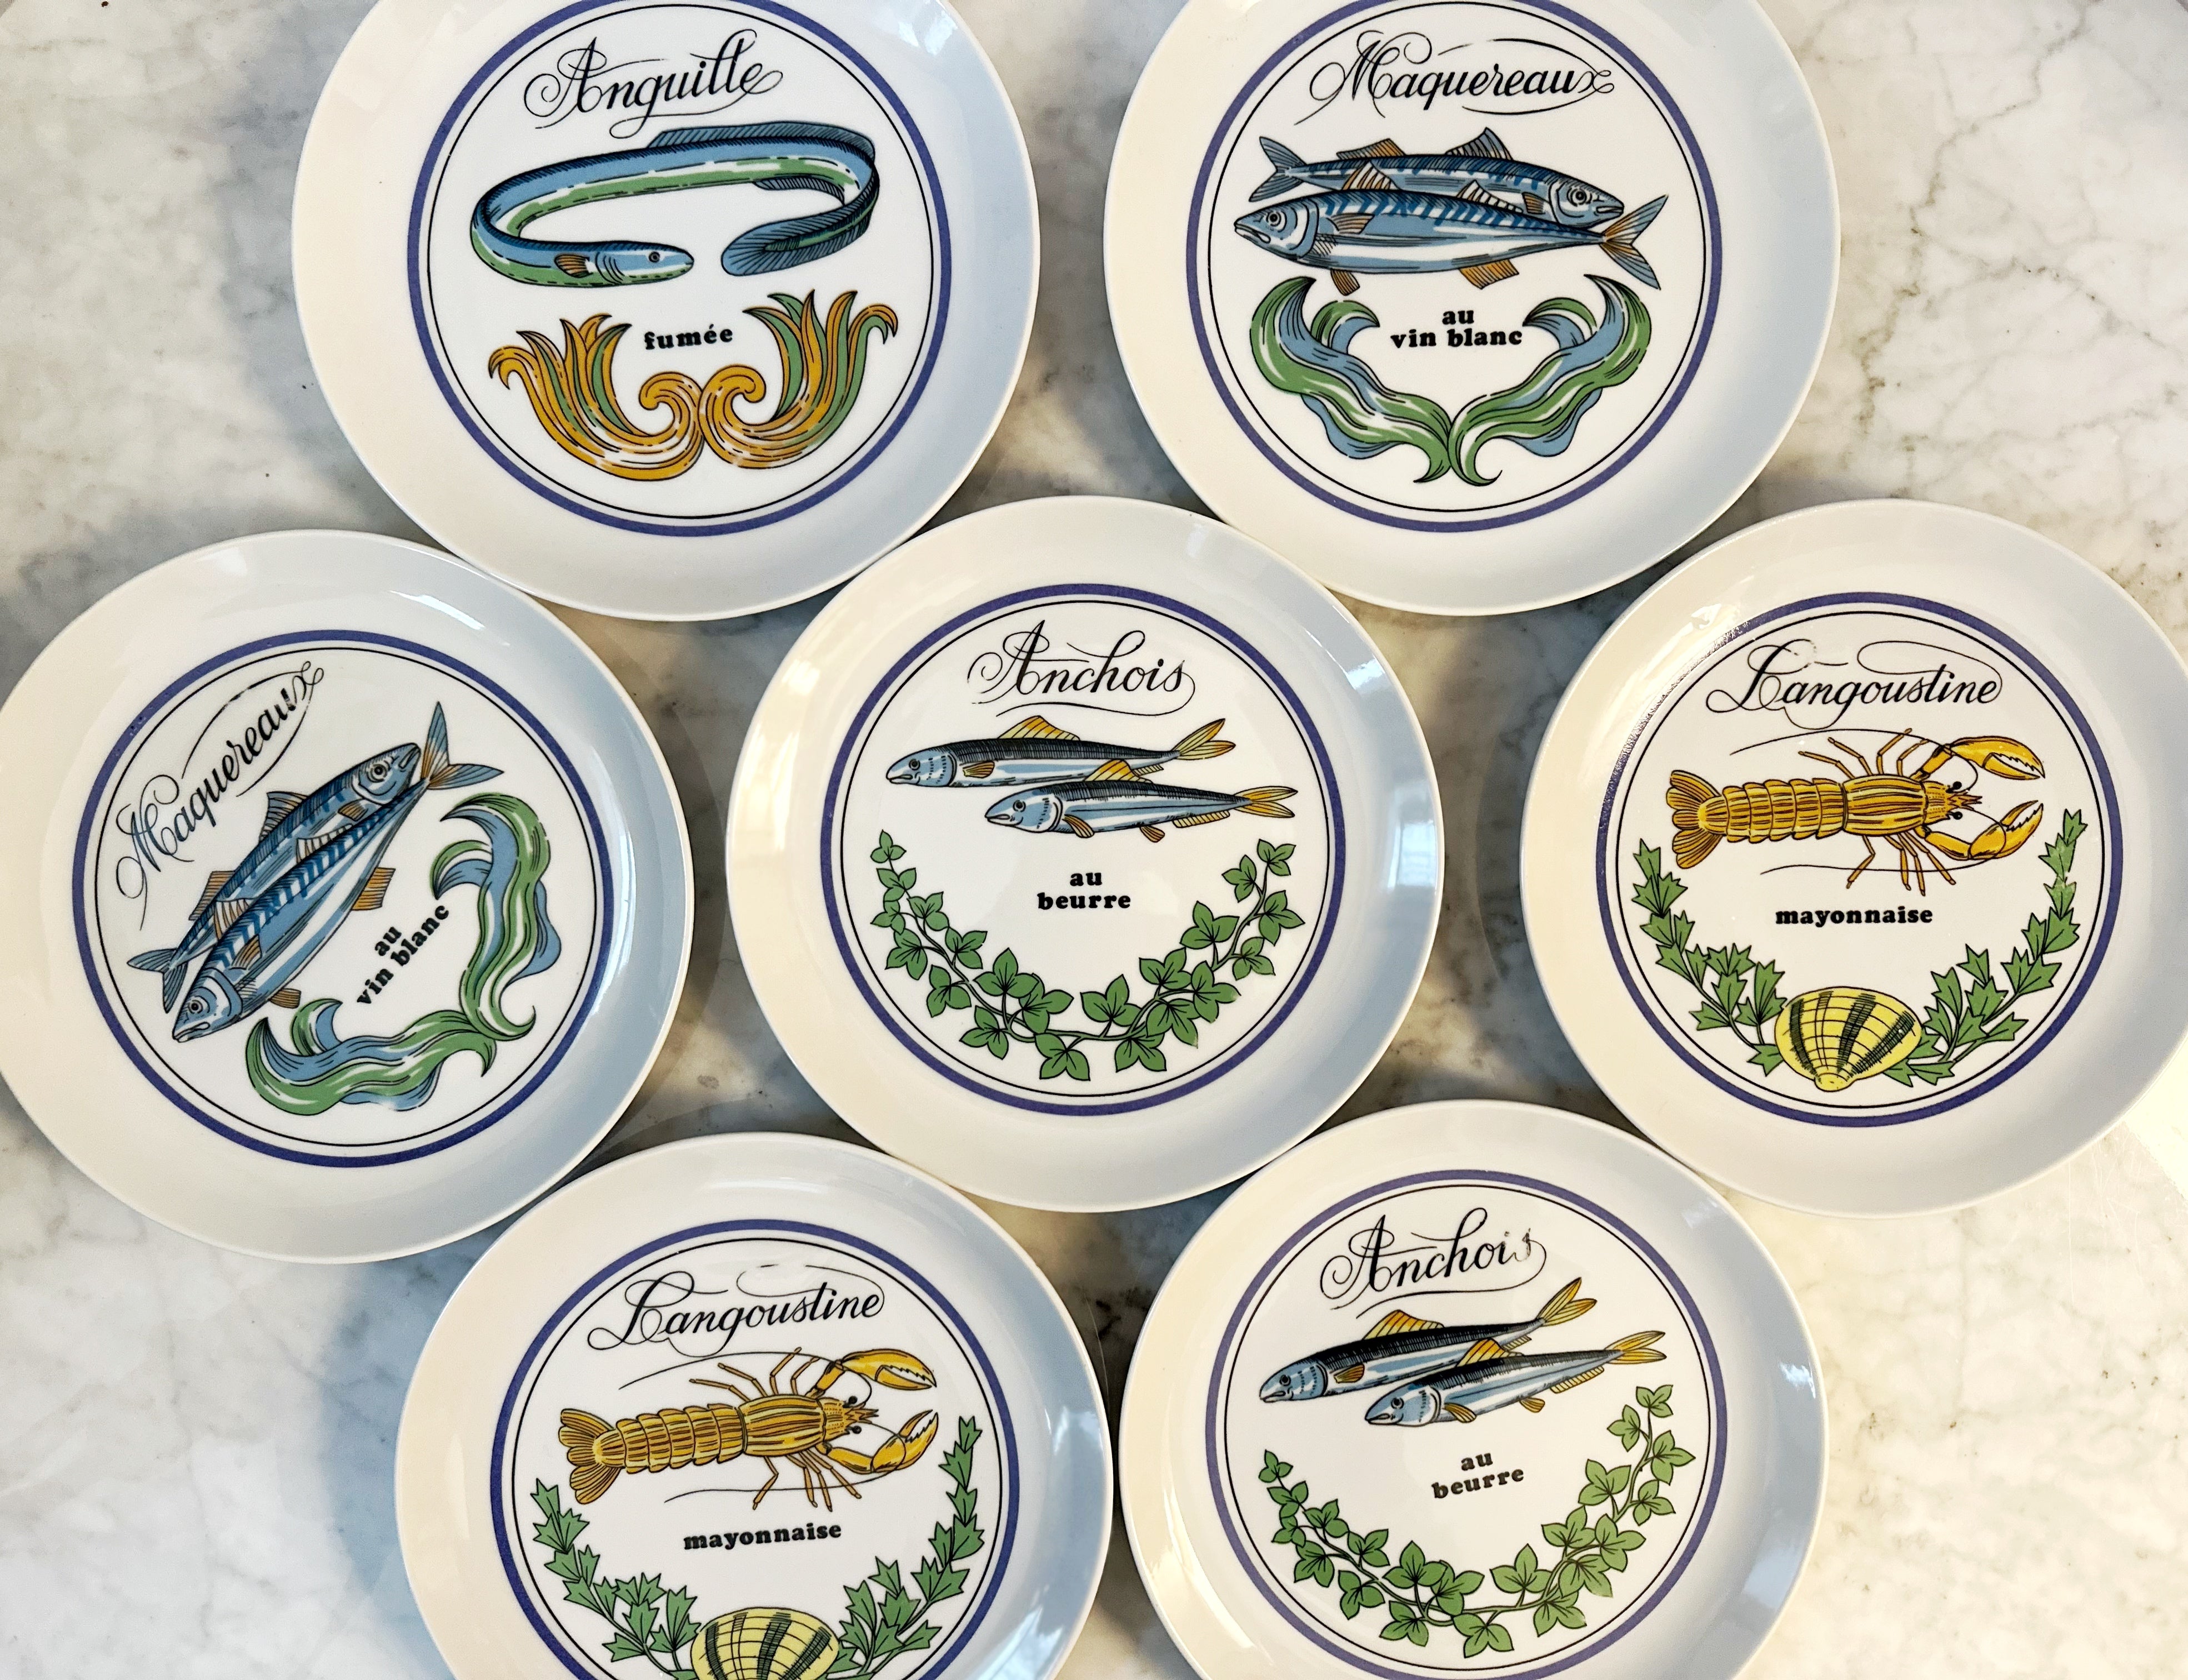 Vintage Japanese Porcelain Plates, French-Inspired Seafood Themes (Set of 7)